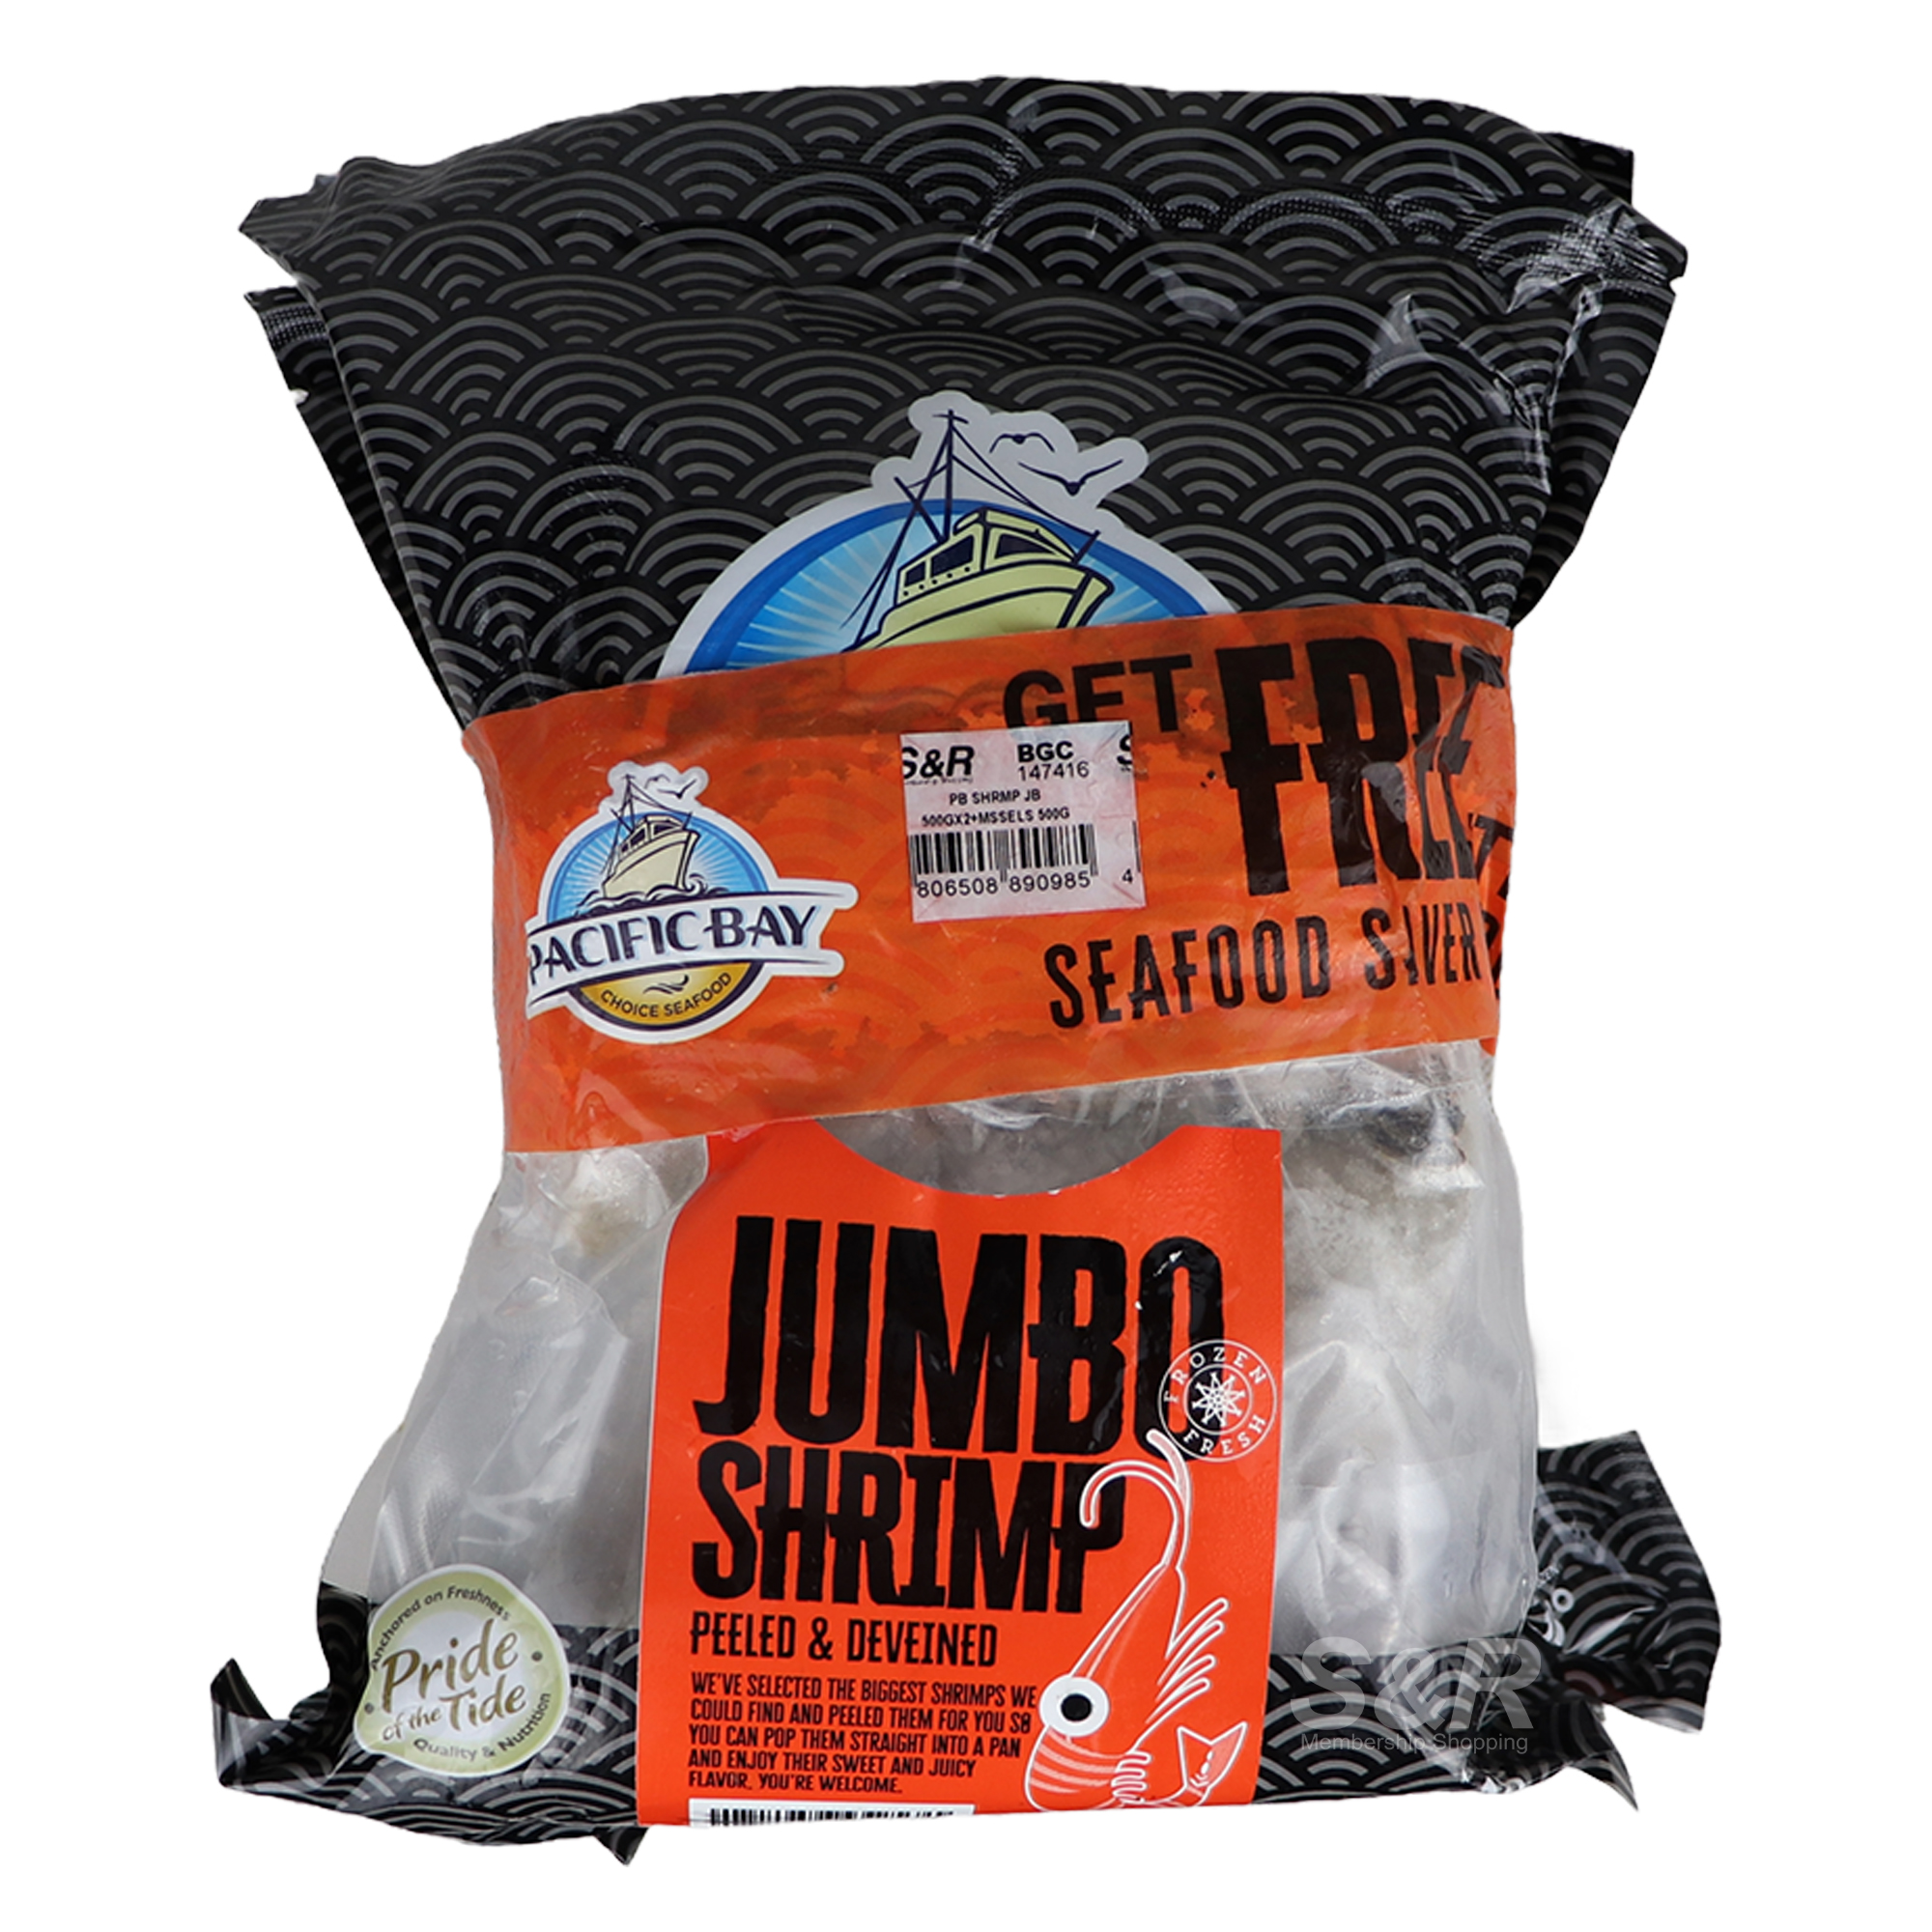 Pacific Bay Jumbo Shrimp 2x500g and Whole Mussels 500g